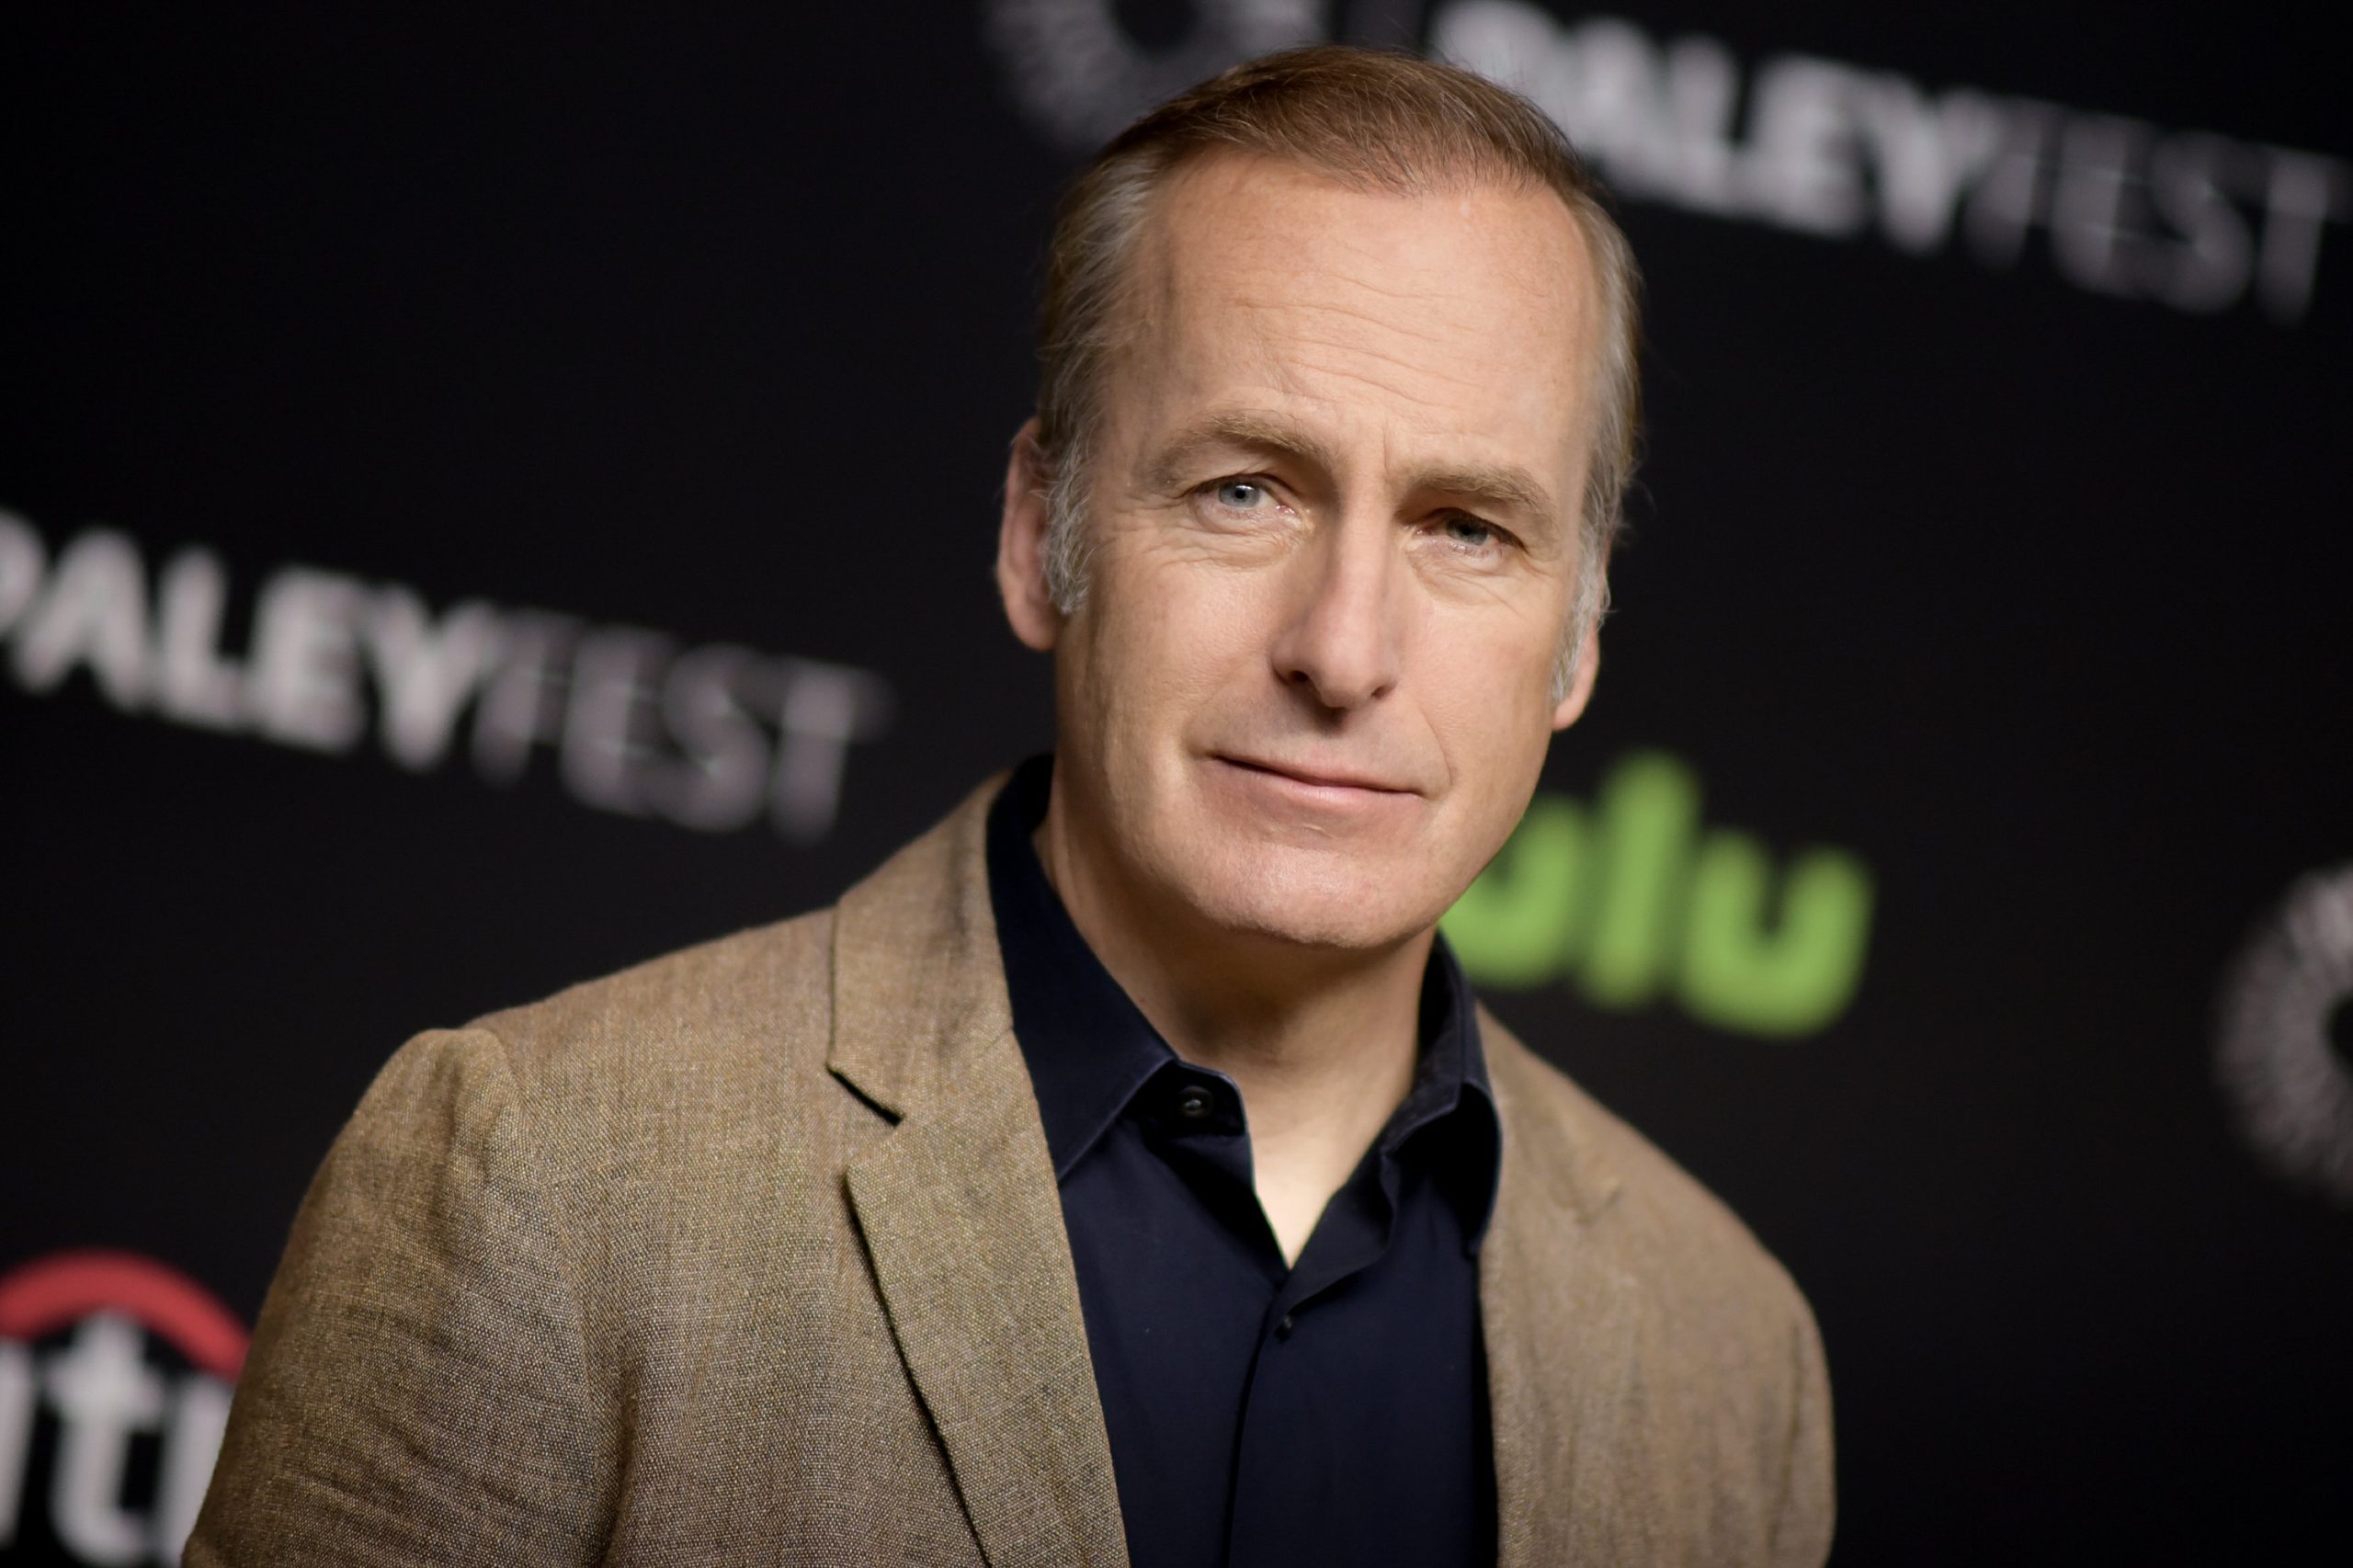 Bob Odenkirk Wiki, Bio, Age, Net Worth, and Other Facts